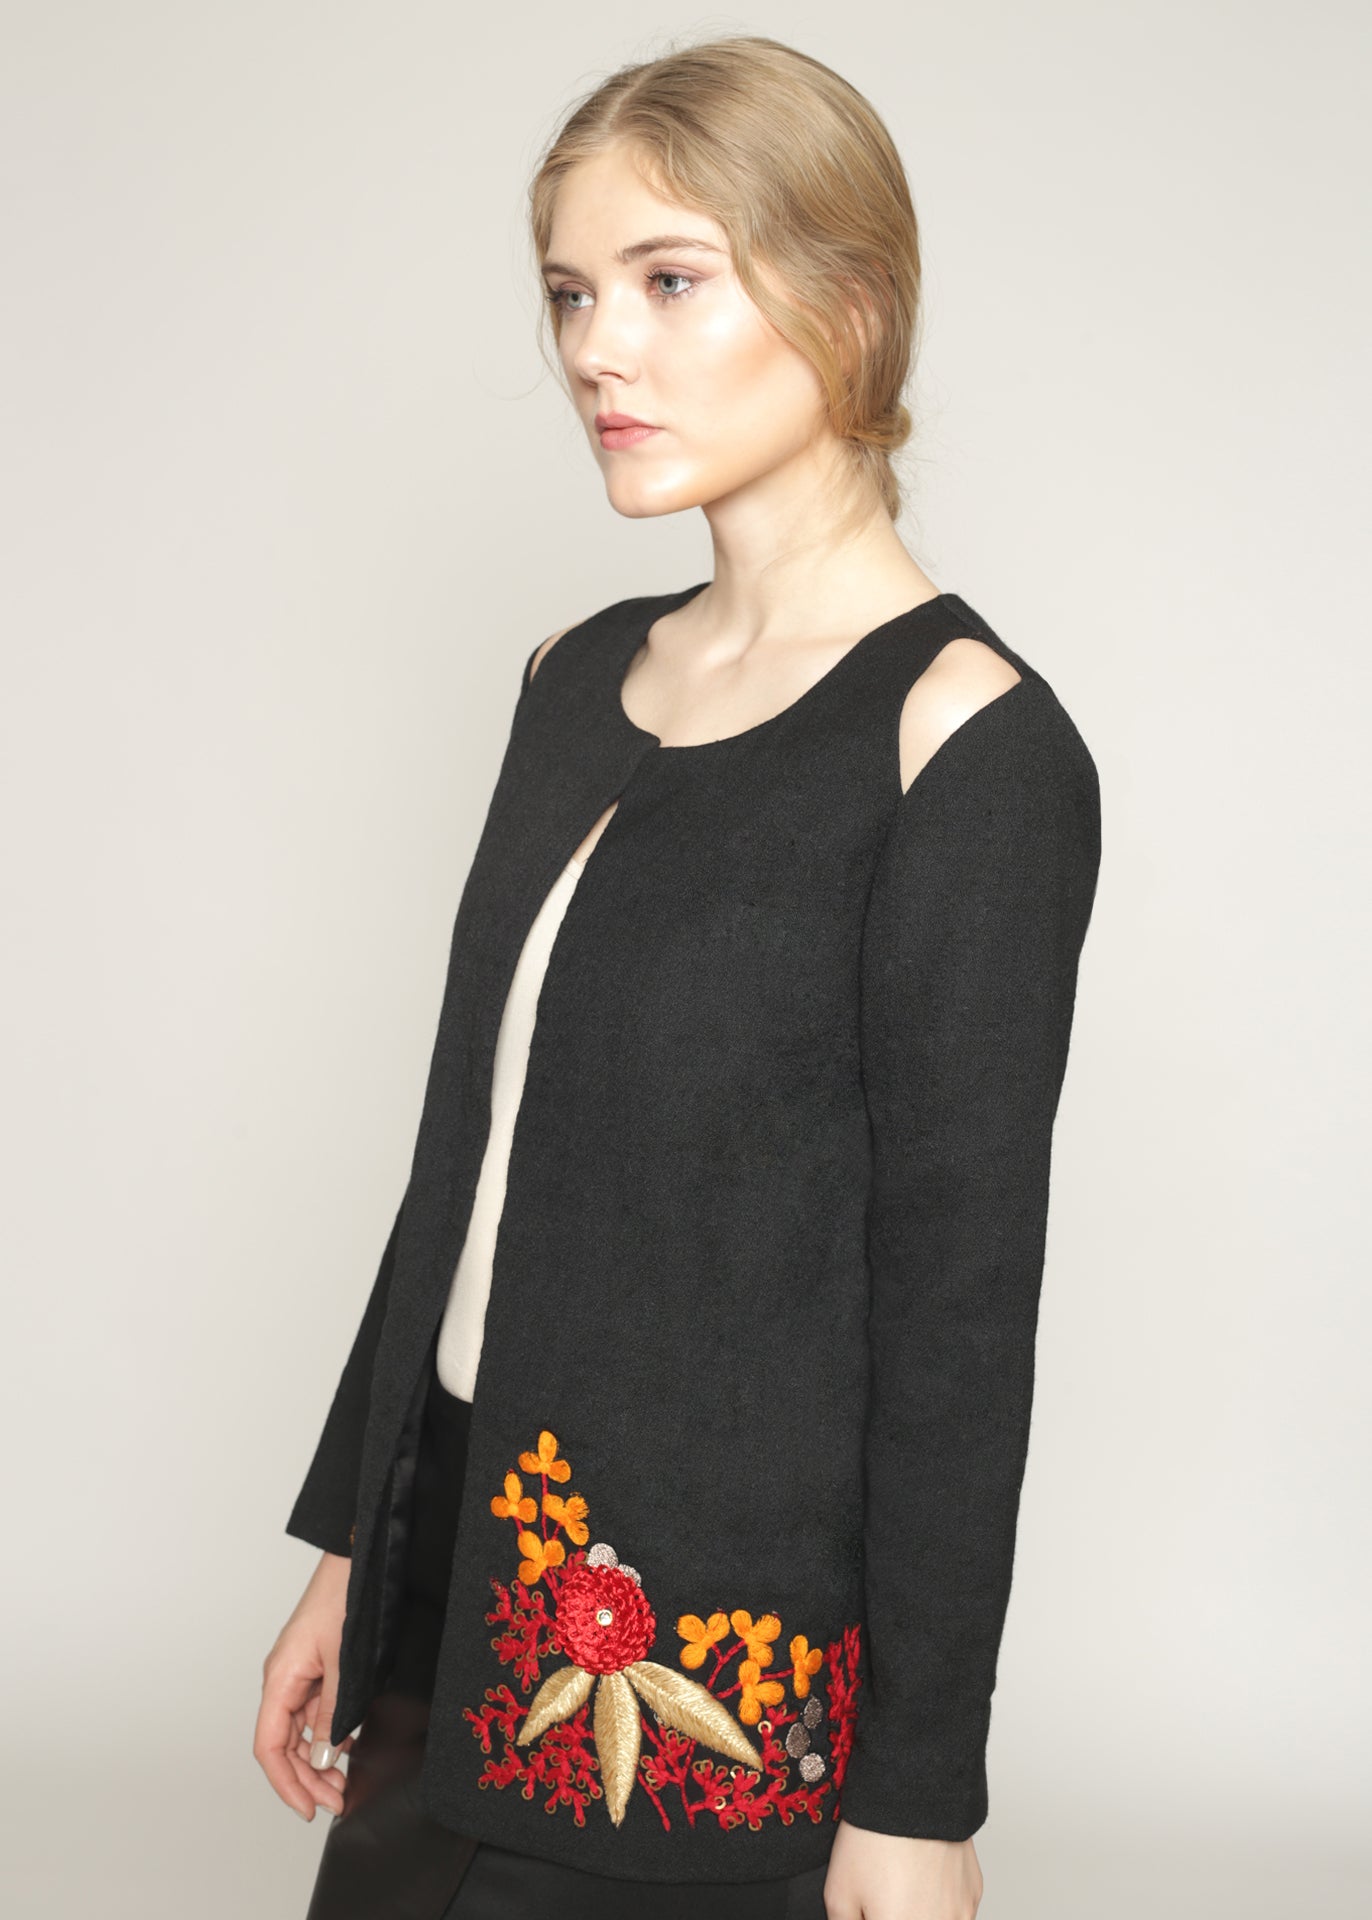 Wool jacket with cutout shoulders and embroidery details